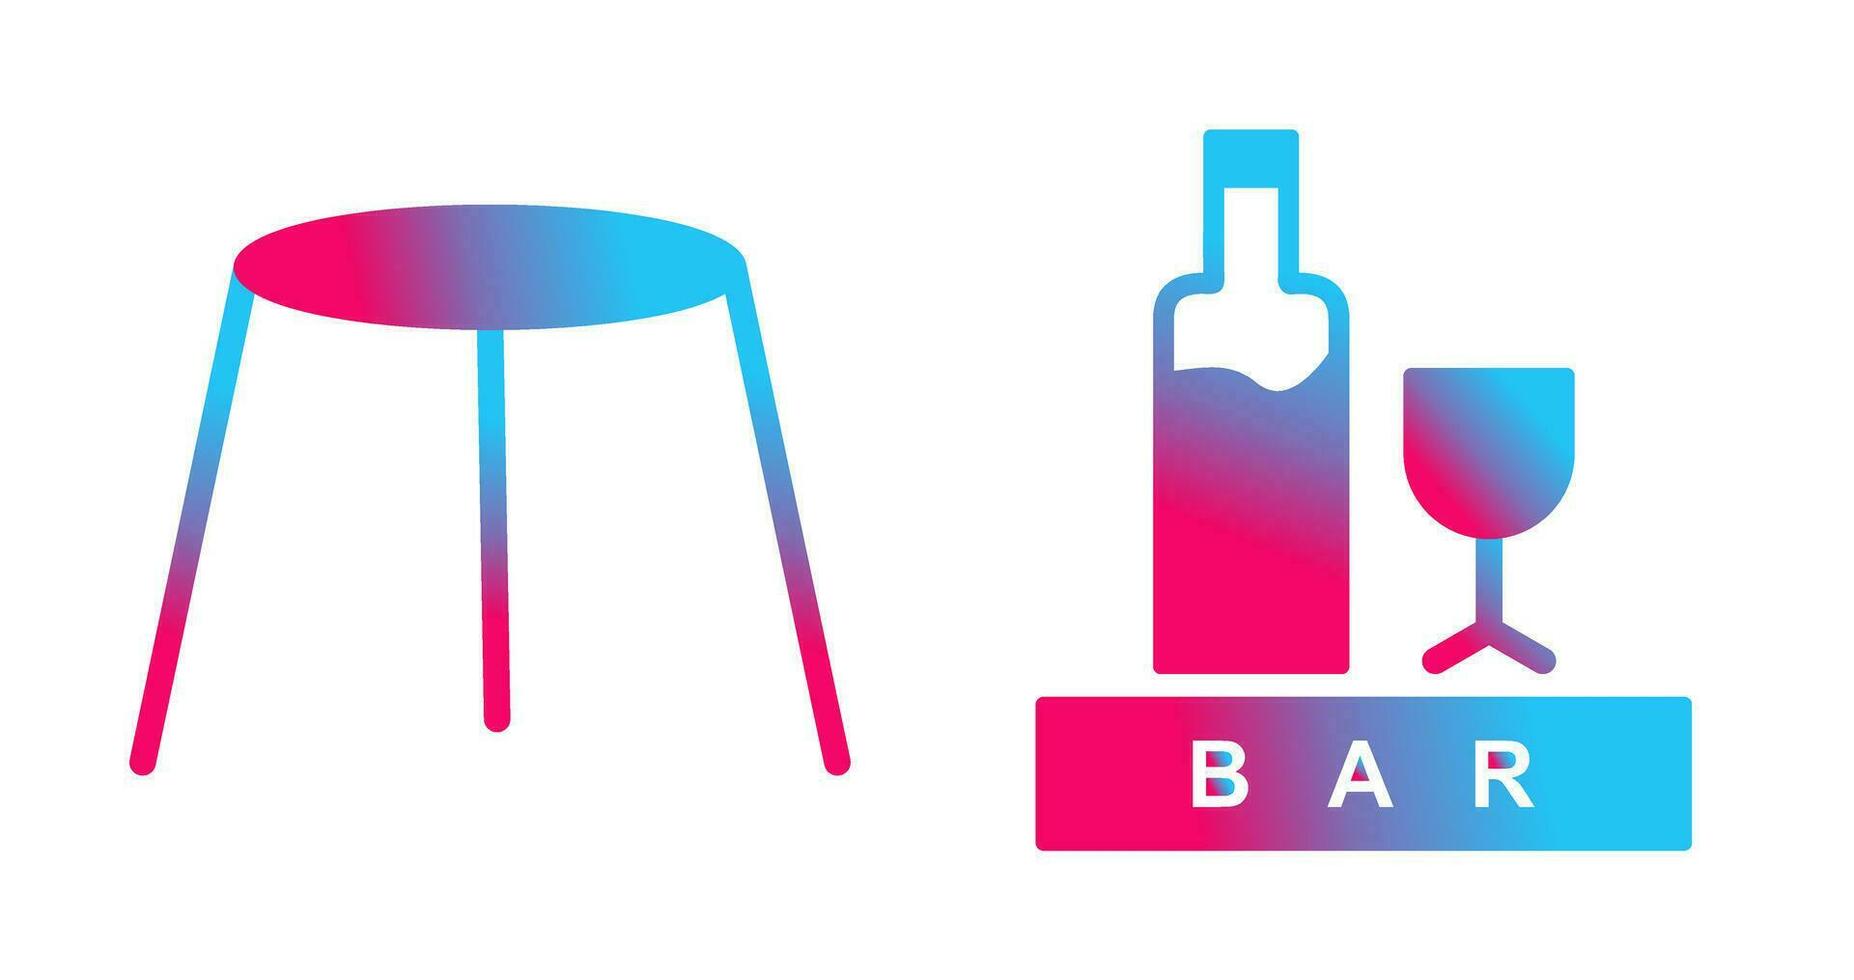 stool and bar sign Icon vector